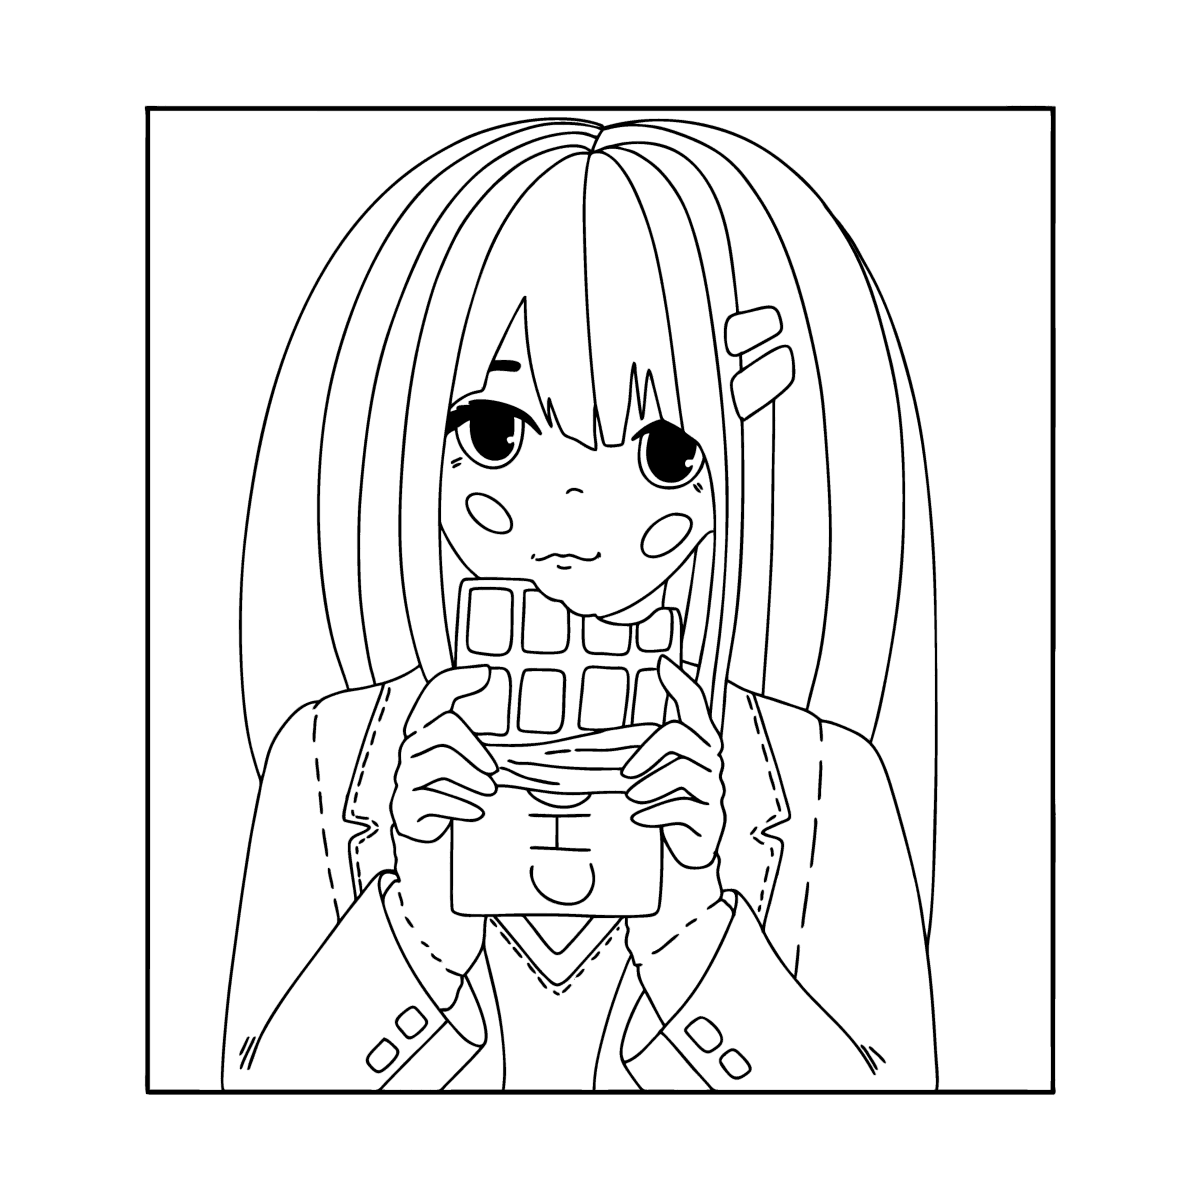 Coloring page charming anime girl â online and print for free